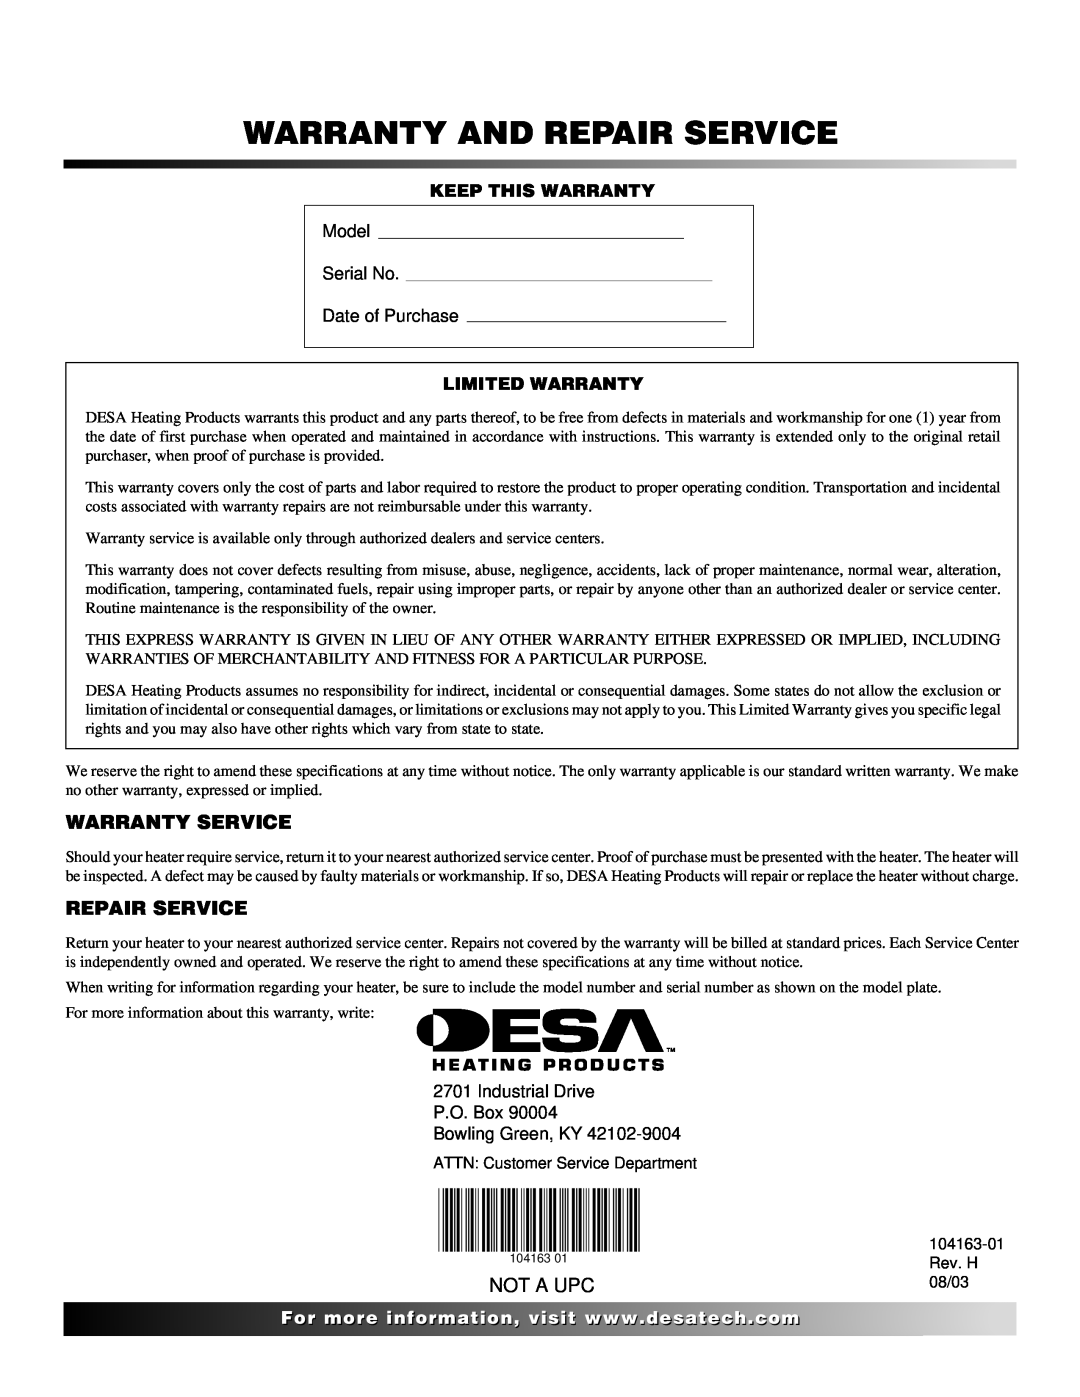 Desa REM30LP owner manual Warranty And Repair Service, Warranty Service, Not A Upc, Keep This Warranty, Limited Warranty 